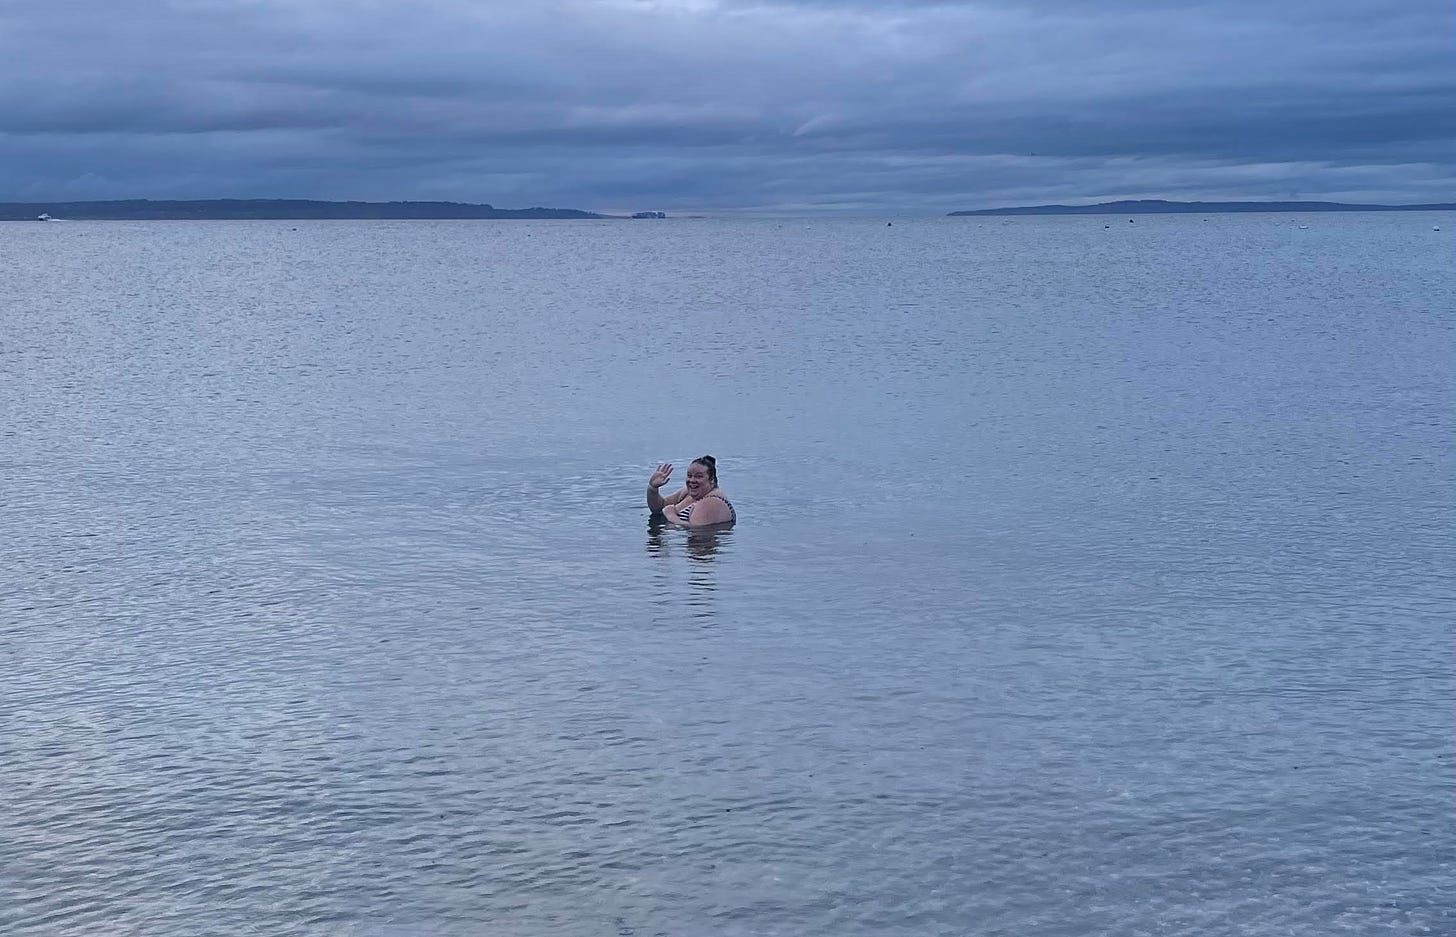 photo of Christina submerged in water up to her shoulders, outside in Puget Sound, waving to camera